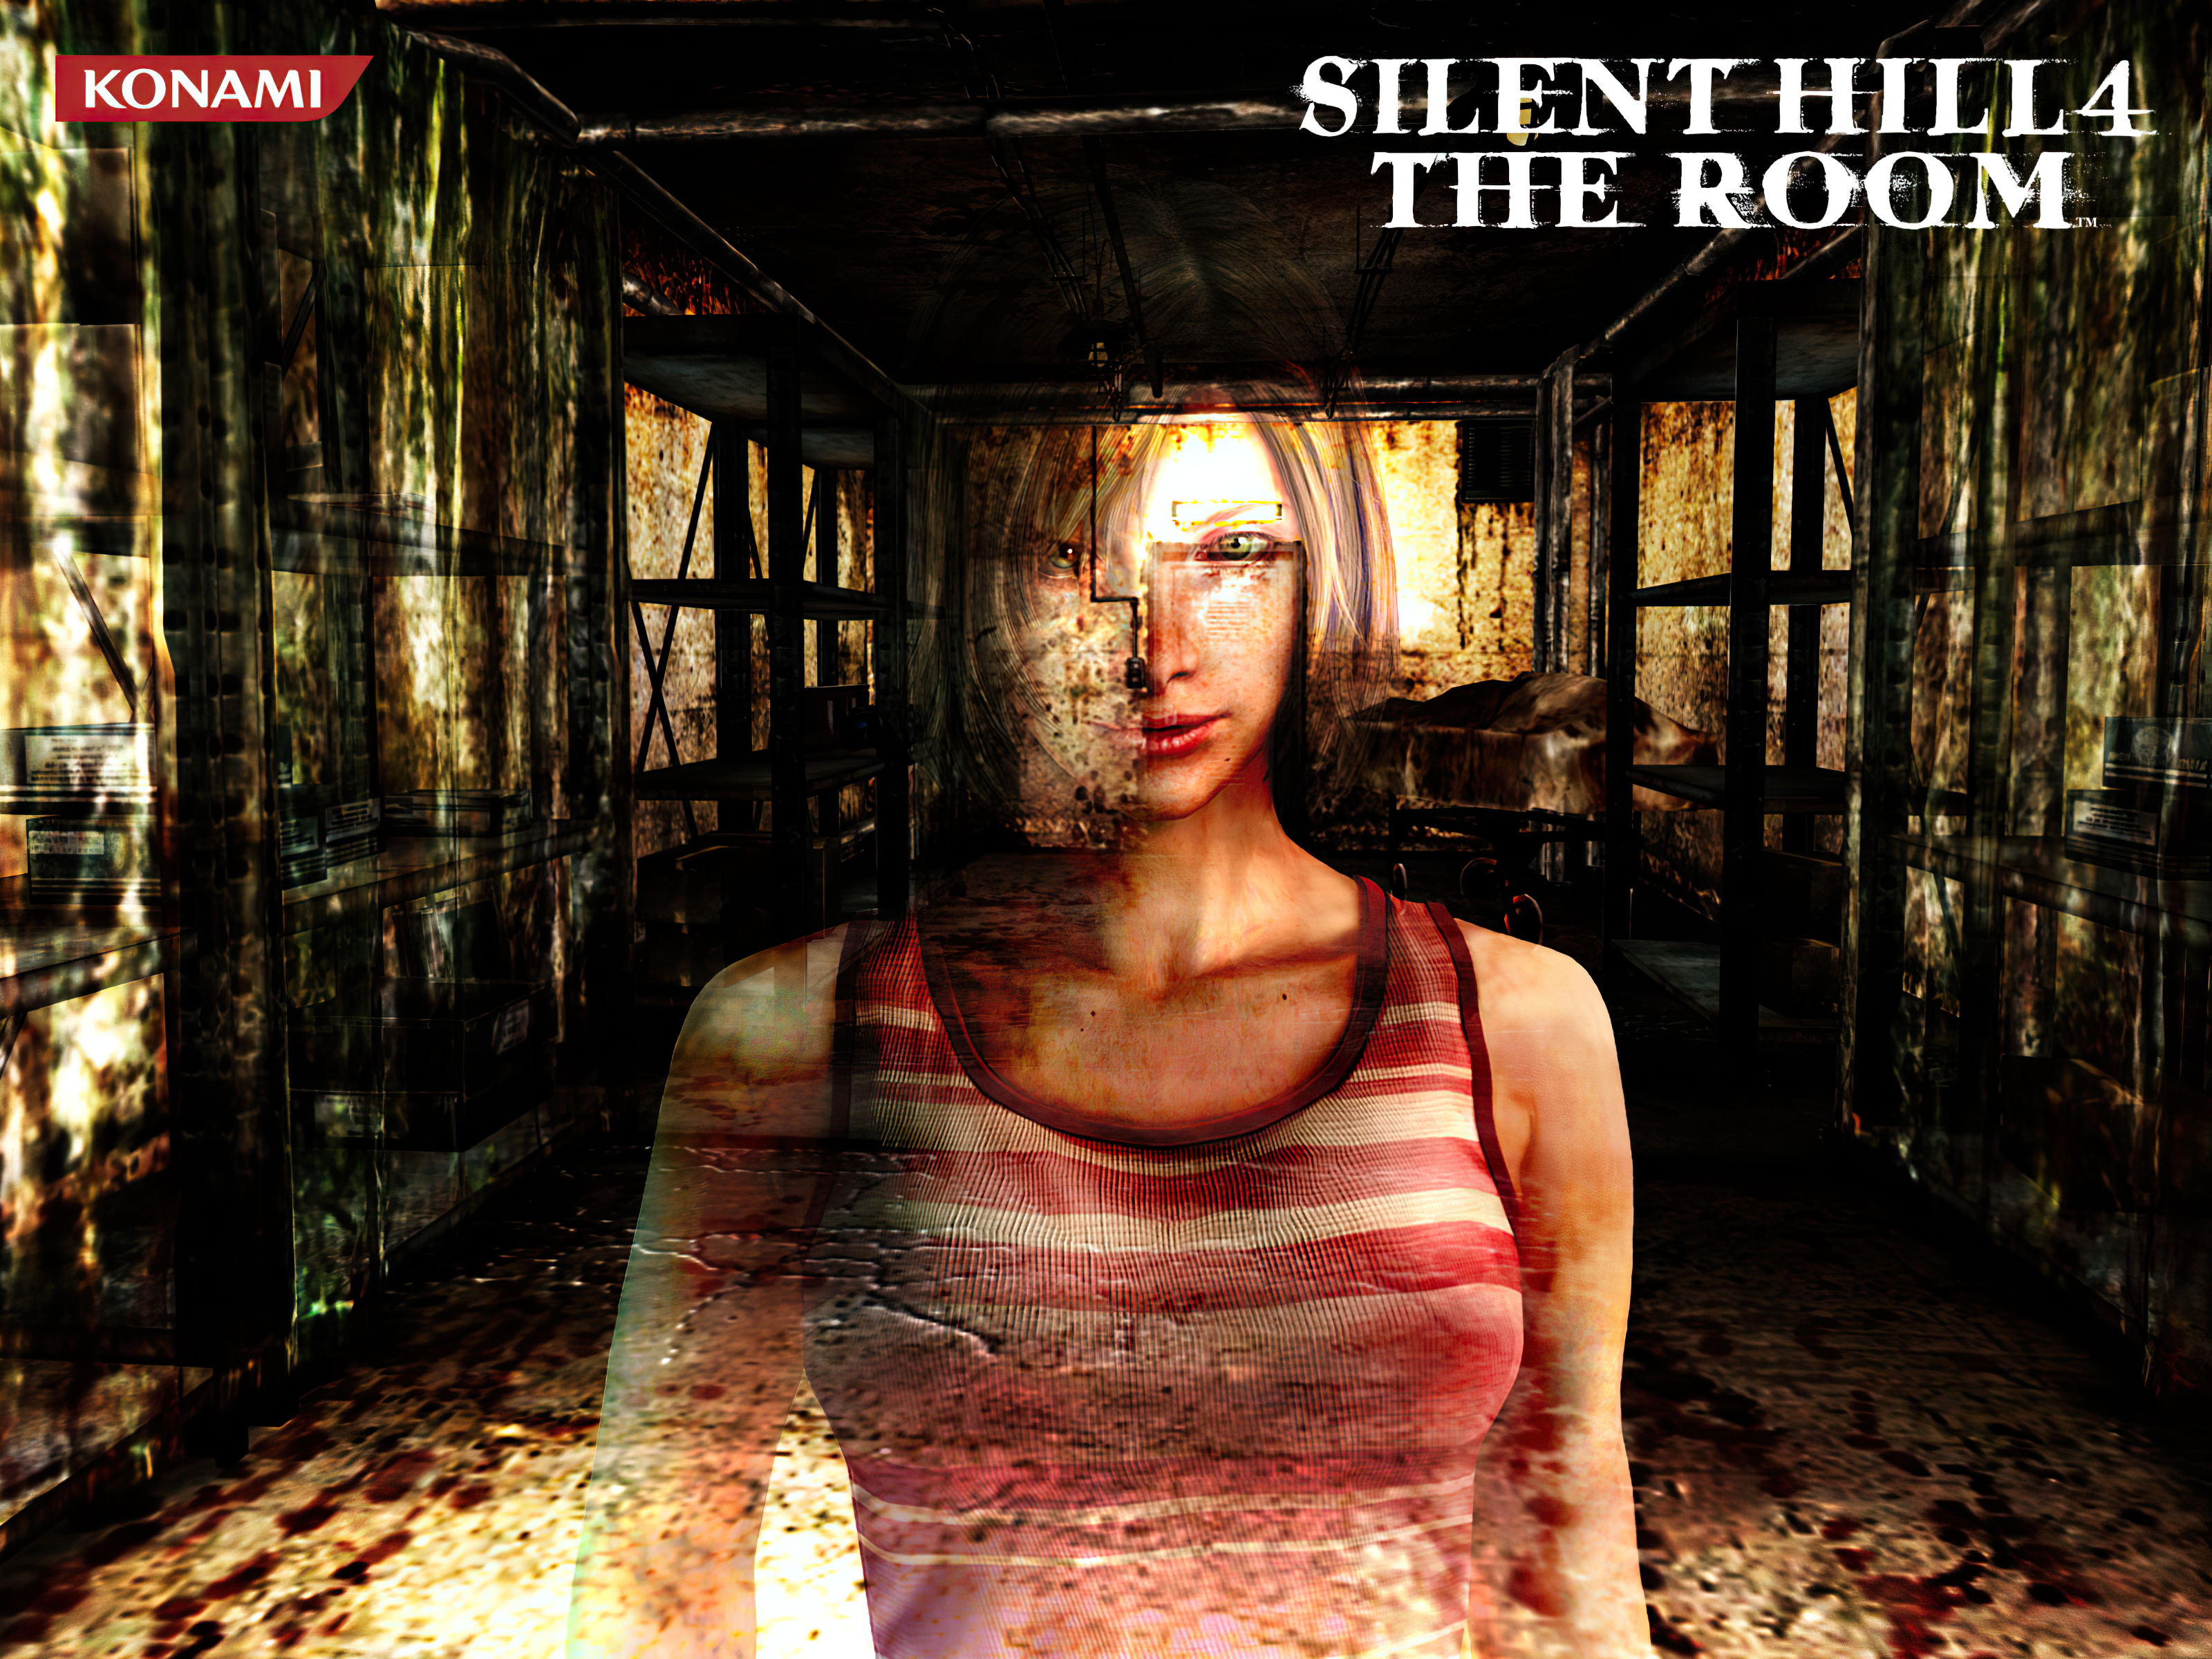 Silent Hill 4 Eileen, a haunting character from the video game. Get ready for a spine-chilling adventure!